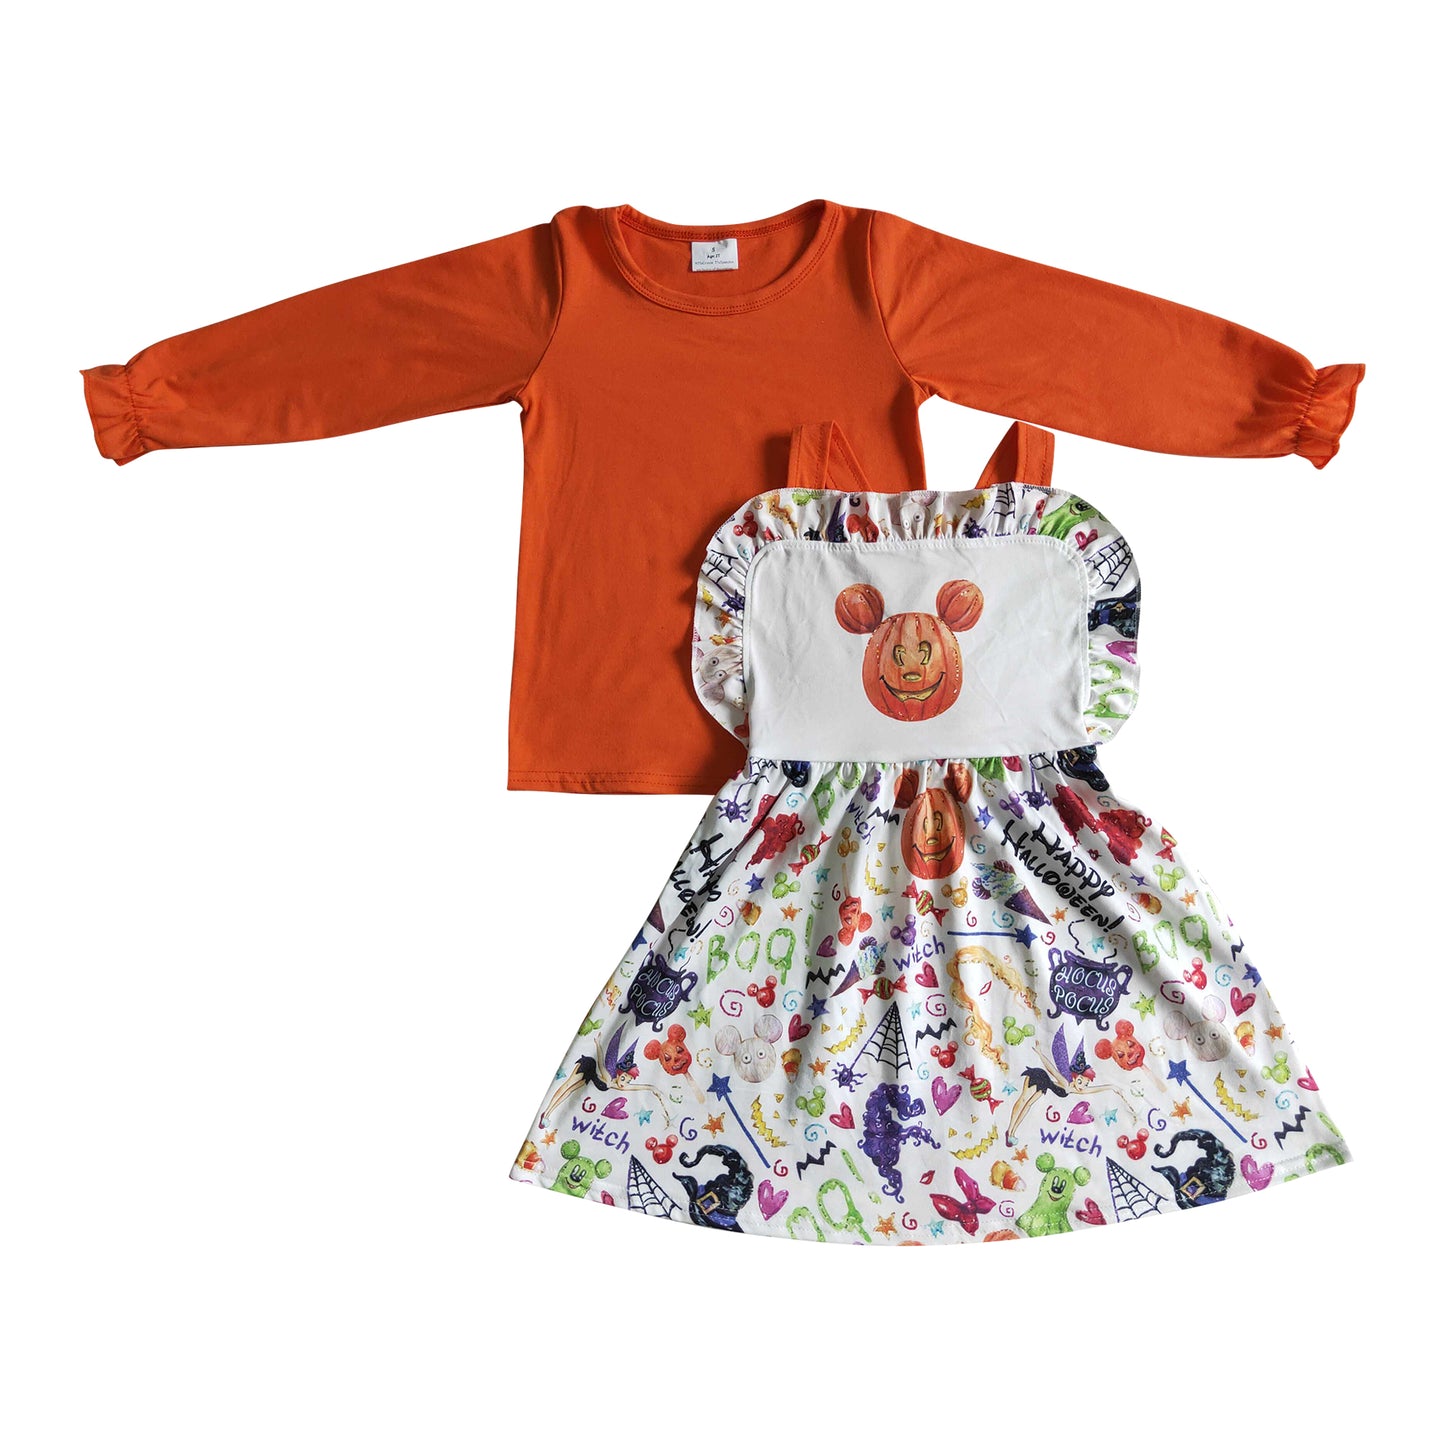 girl clothing halloween orange cotton shirt character candy cross skirt outfit